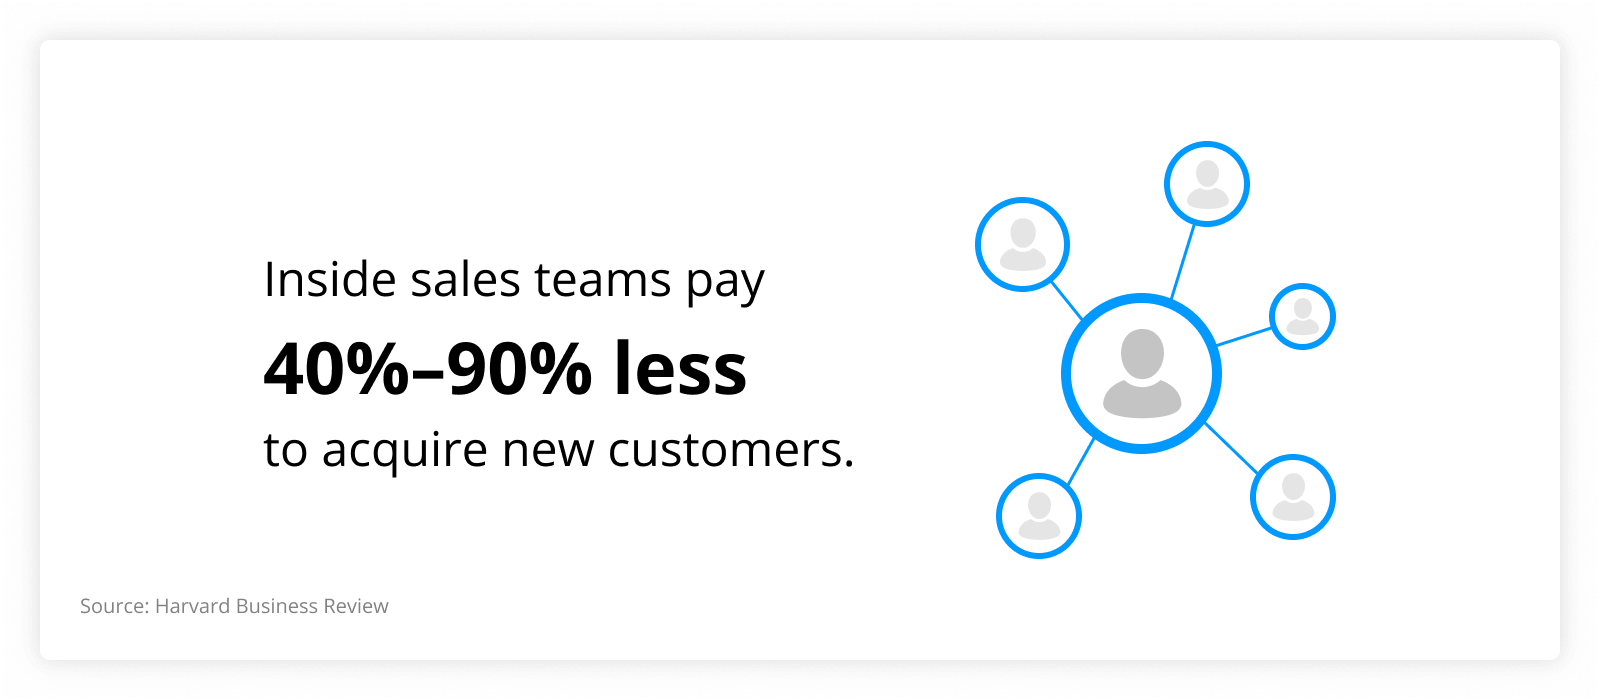 graph showing that nside sales teams pay 40%–90% less to acquire new customers